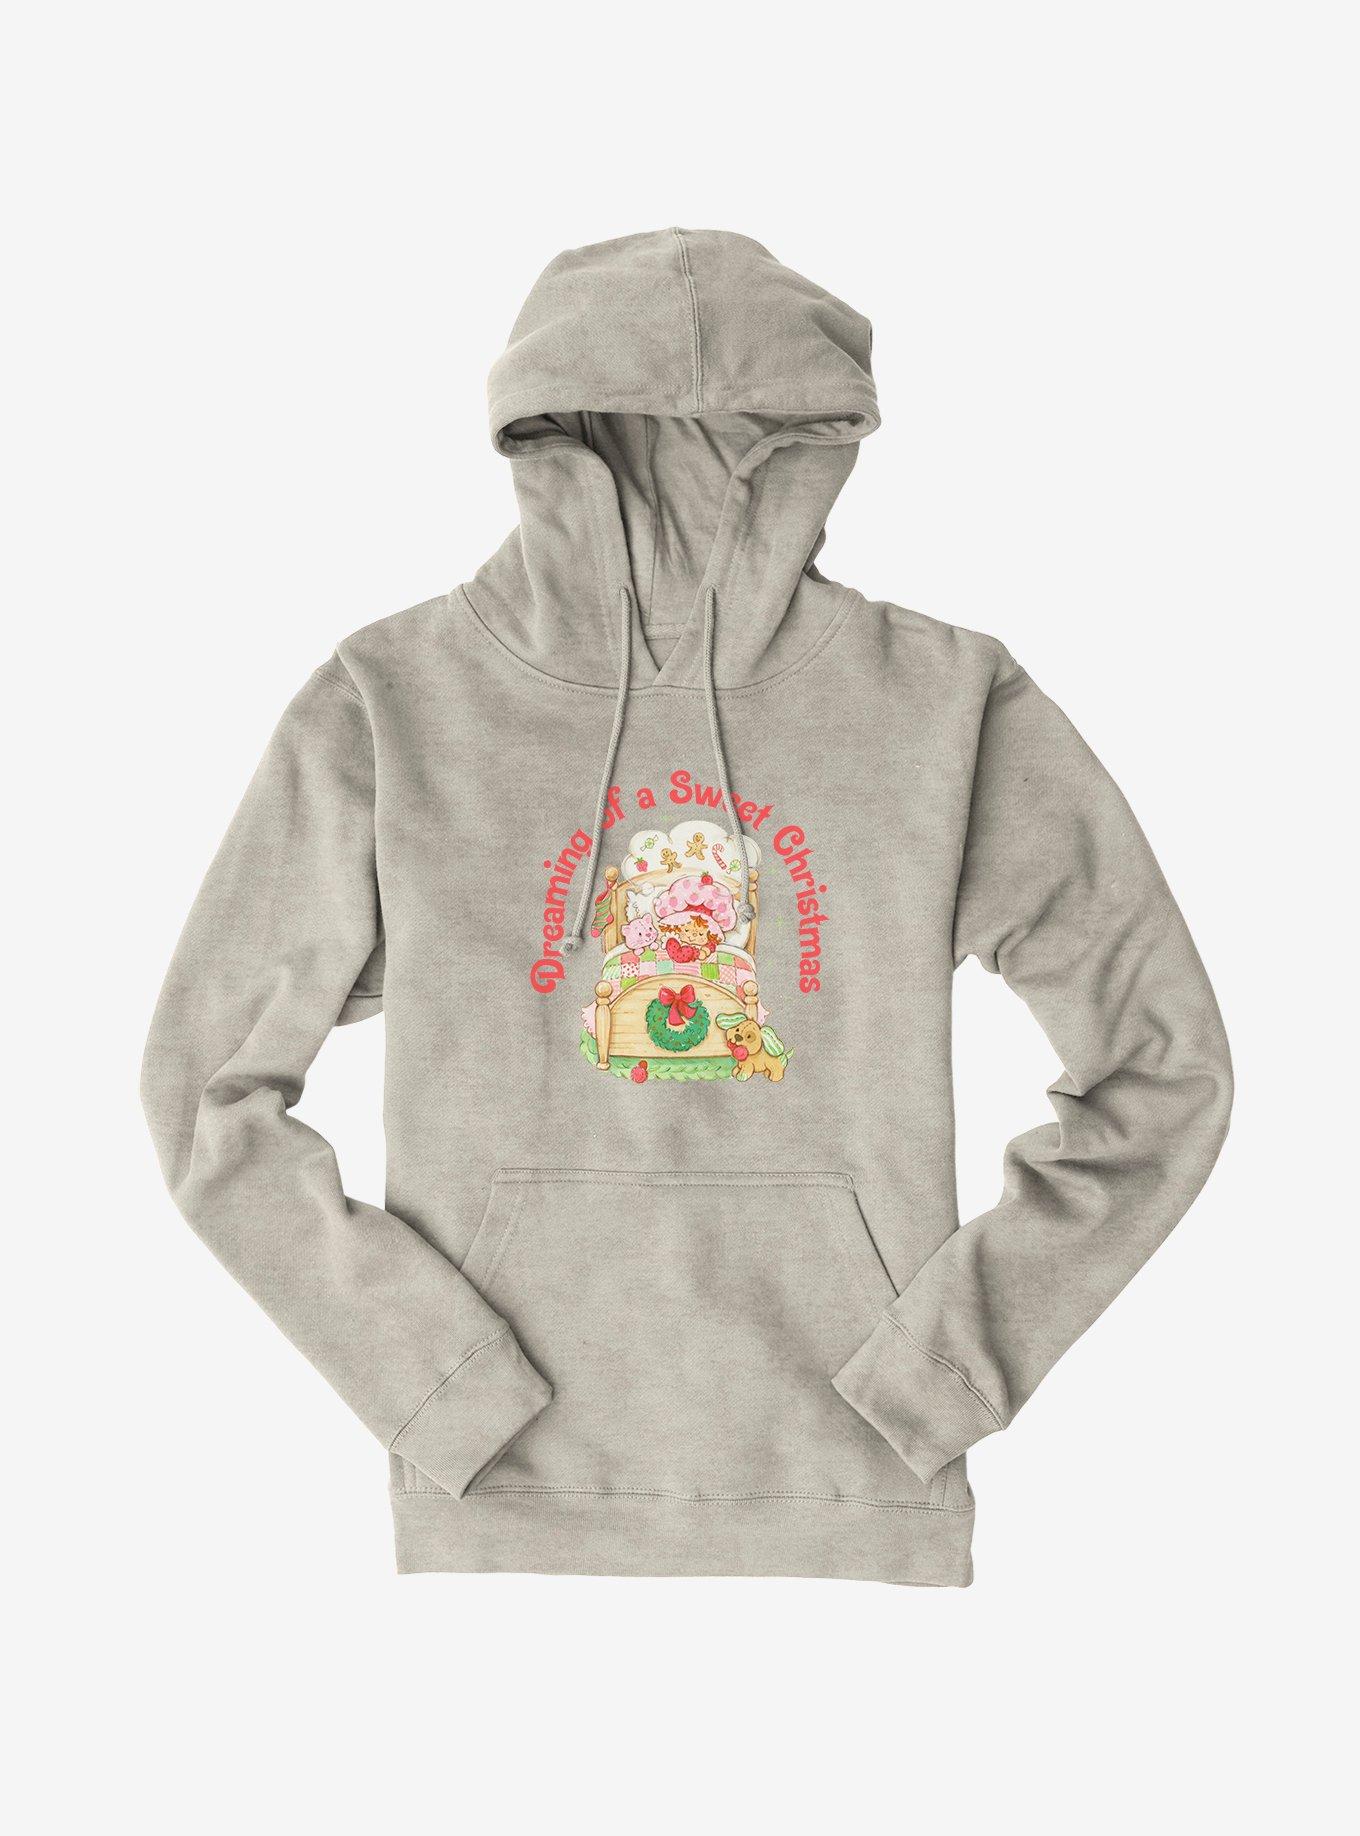 Strawberry Shortcake Dreaming Of A Sweet Christmas Hoodie